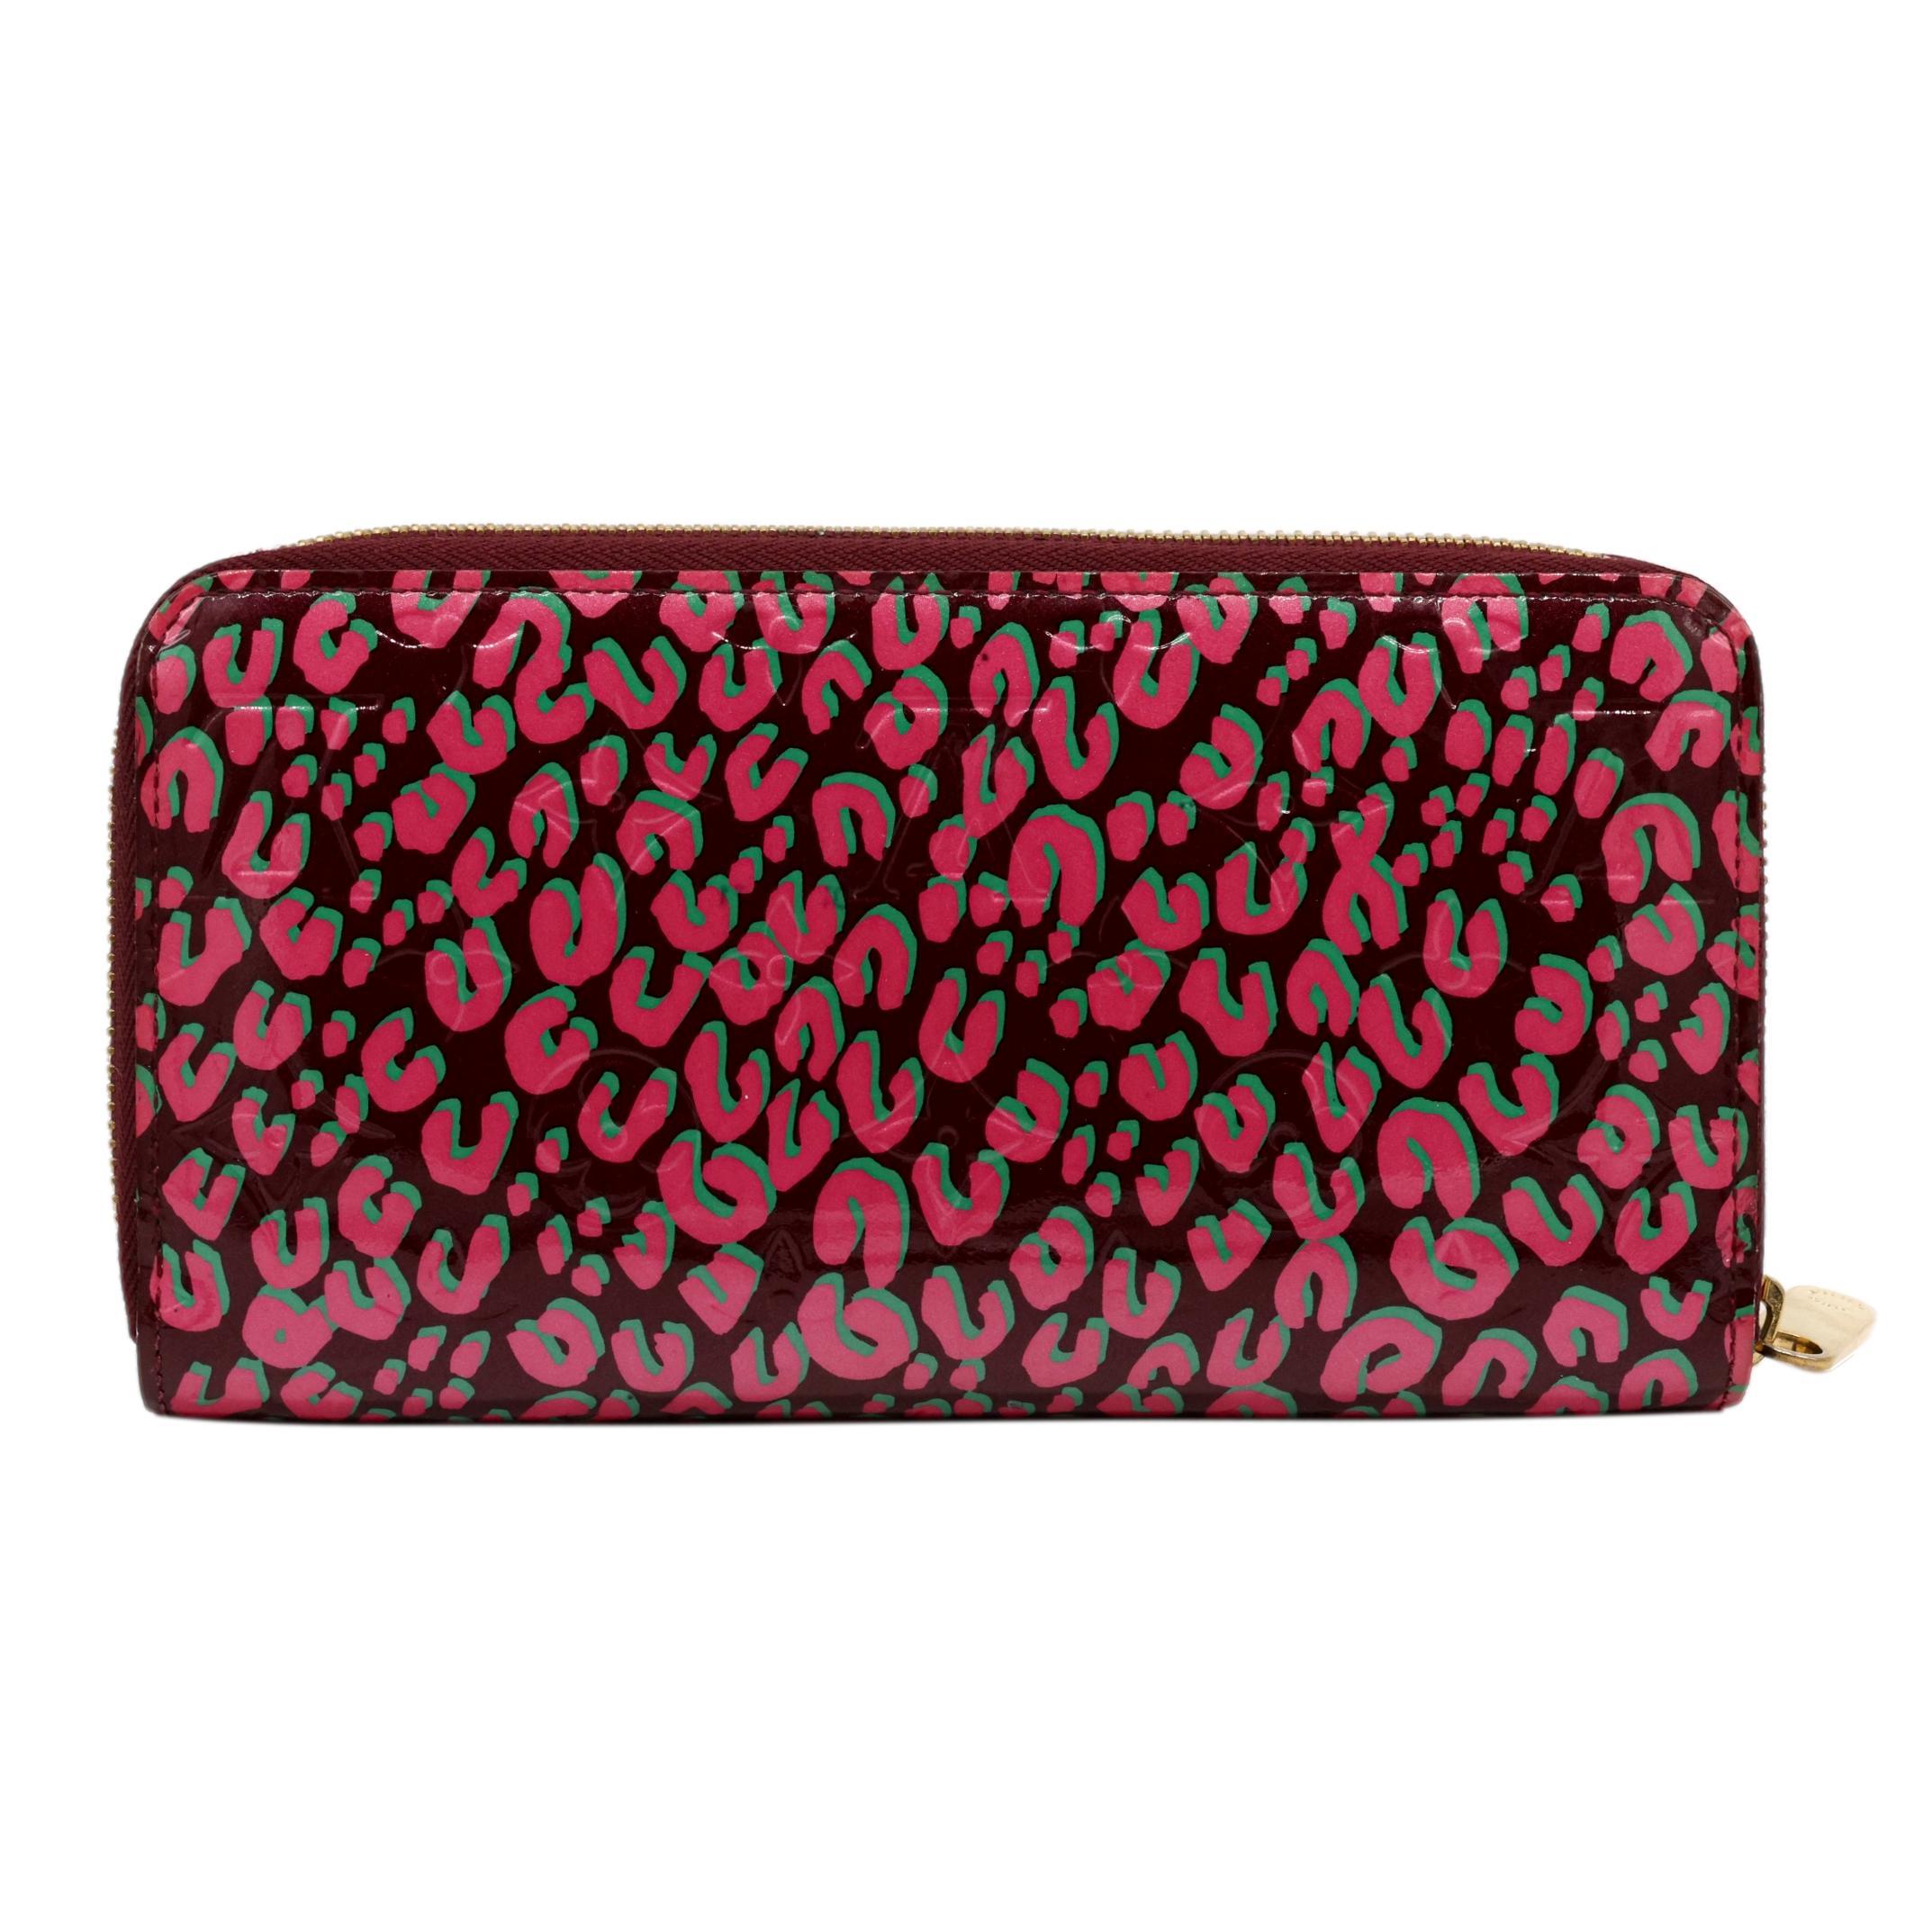 Louis Vuitton x Stephen Sprouse Limited Edition Rouge Fauviste & Corail Monogram Leopard Zippy Wallet, 2010. In 2008, the iconic fashion house Louis Vuitton creative director Marc Jacobs collaborated with legendary designer and childhood